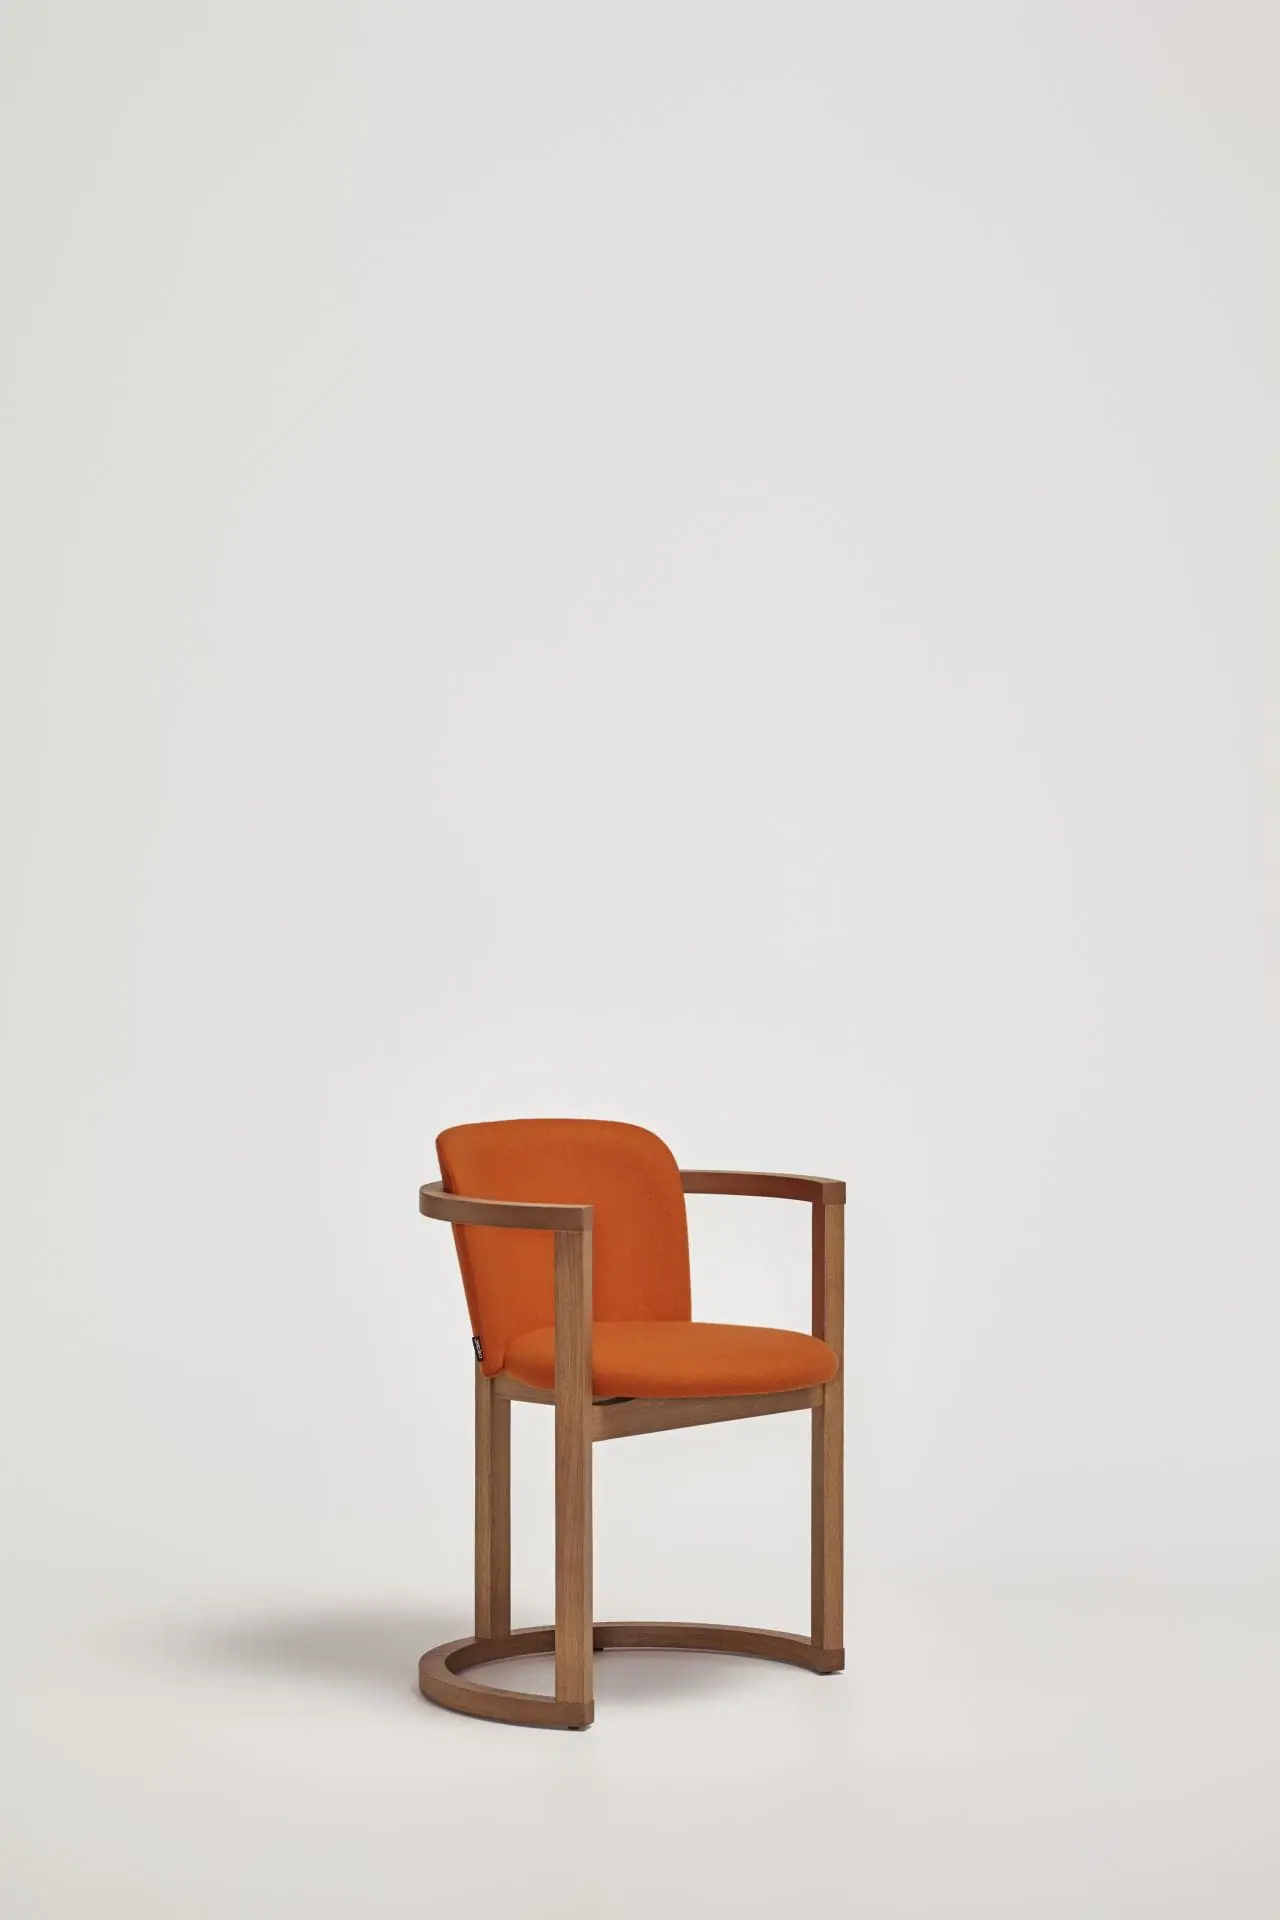 capdell-stir-chair-04